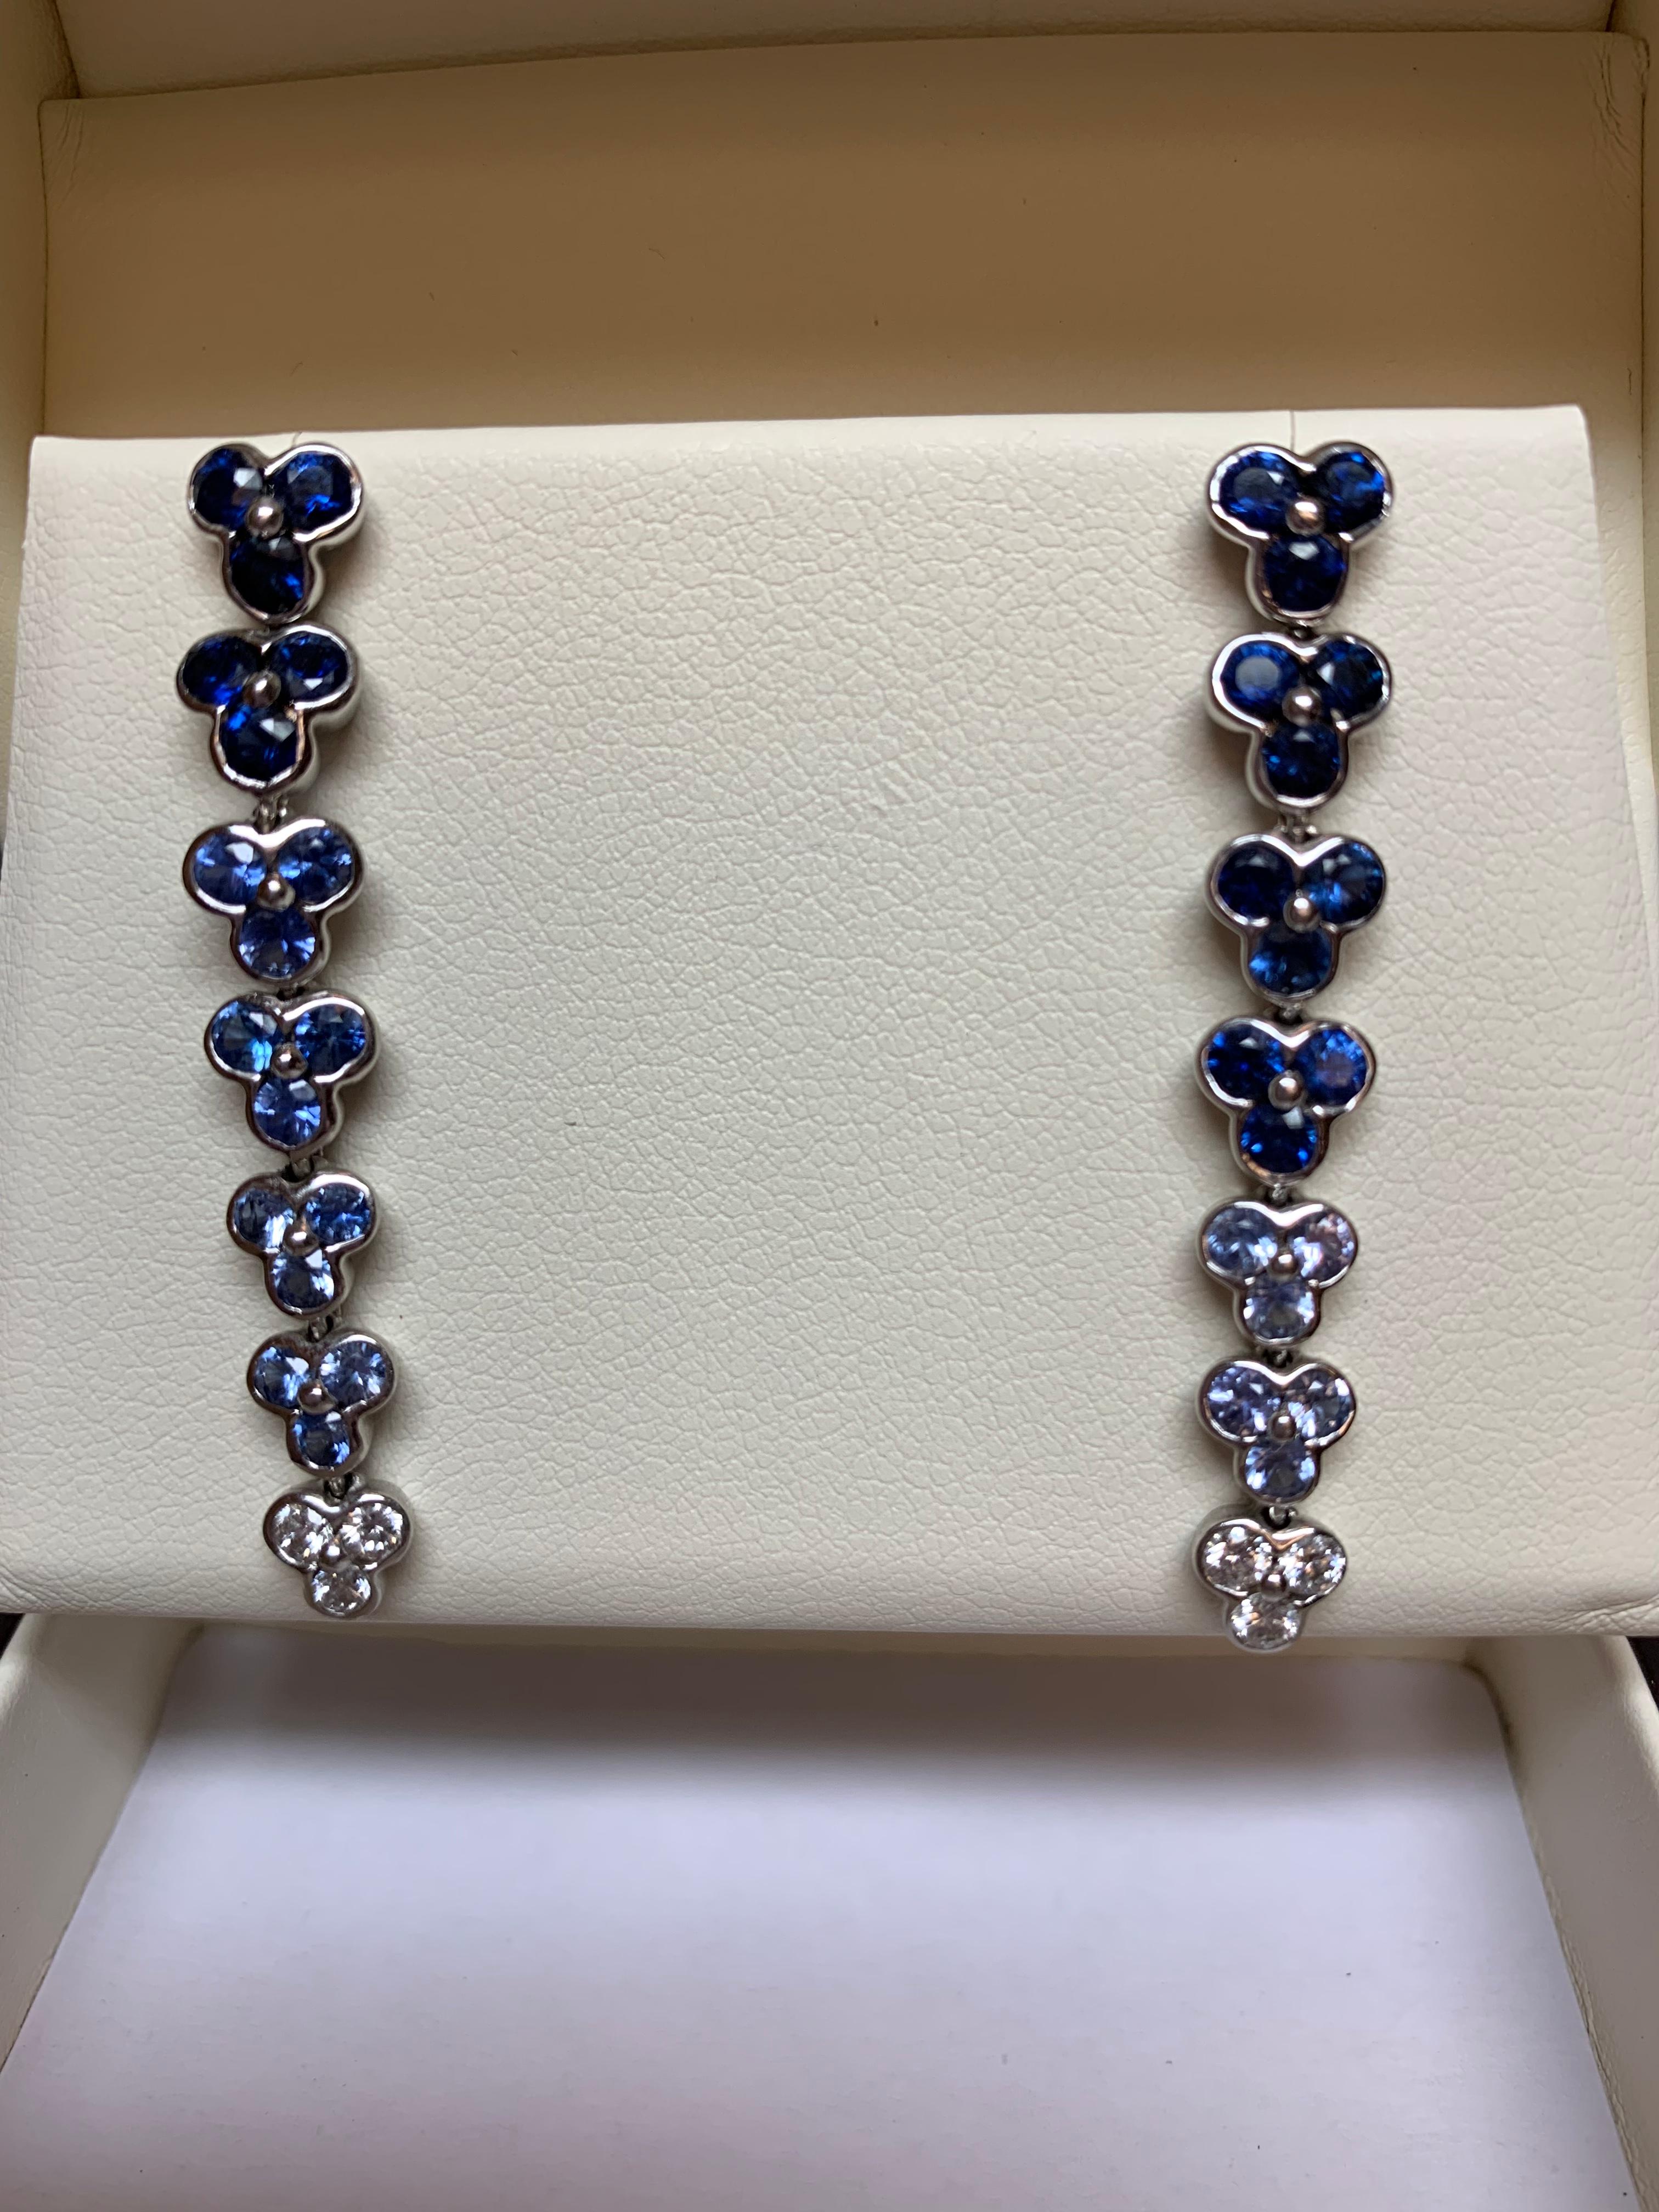 The Wisteria collection is one that has a graduation of color. Theses Blue Sapphire earring start at the top with a rich blue and taper down to lighter blue and end with a diamond. They have an incredible look on the ear. They contain 3.45 carats of